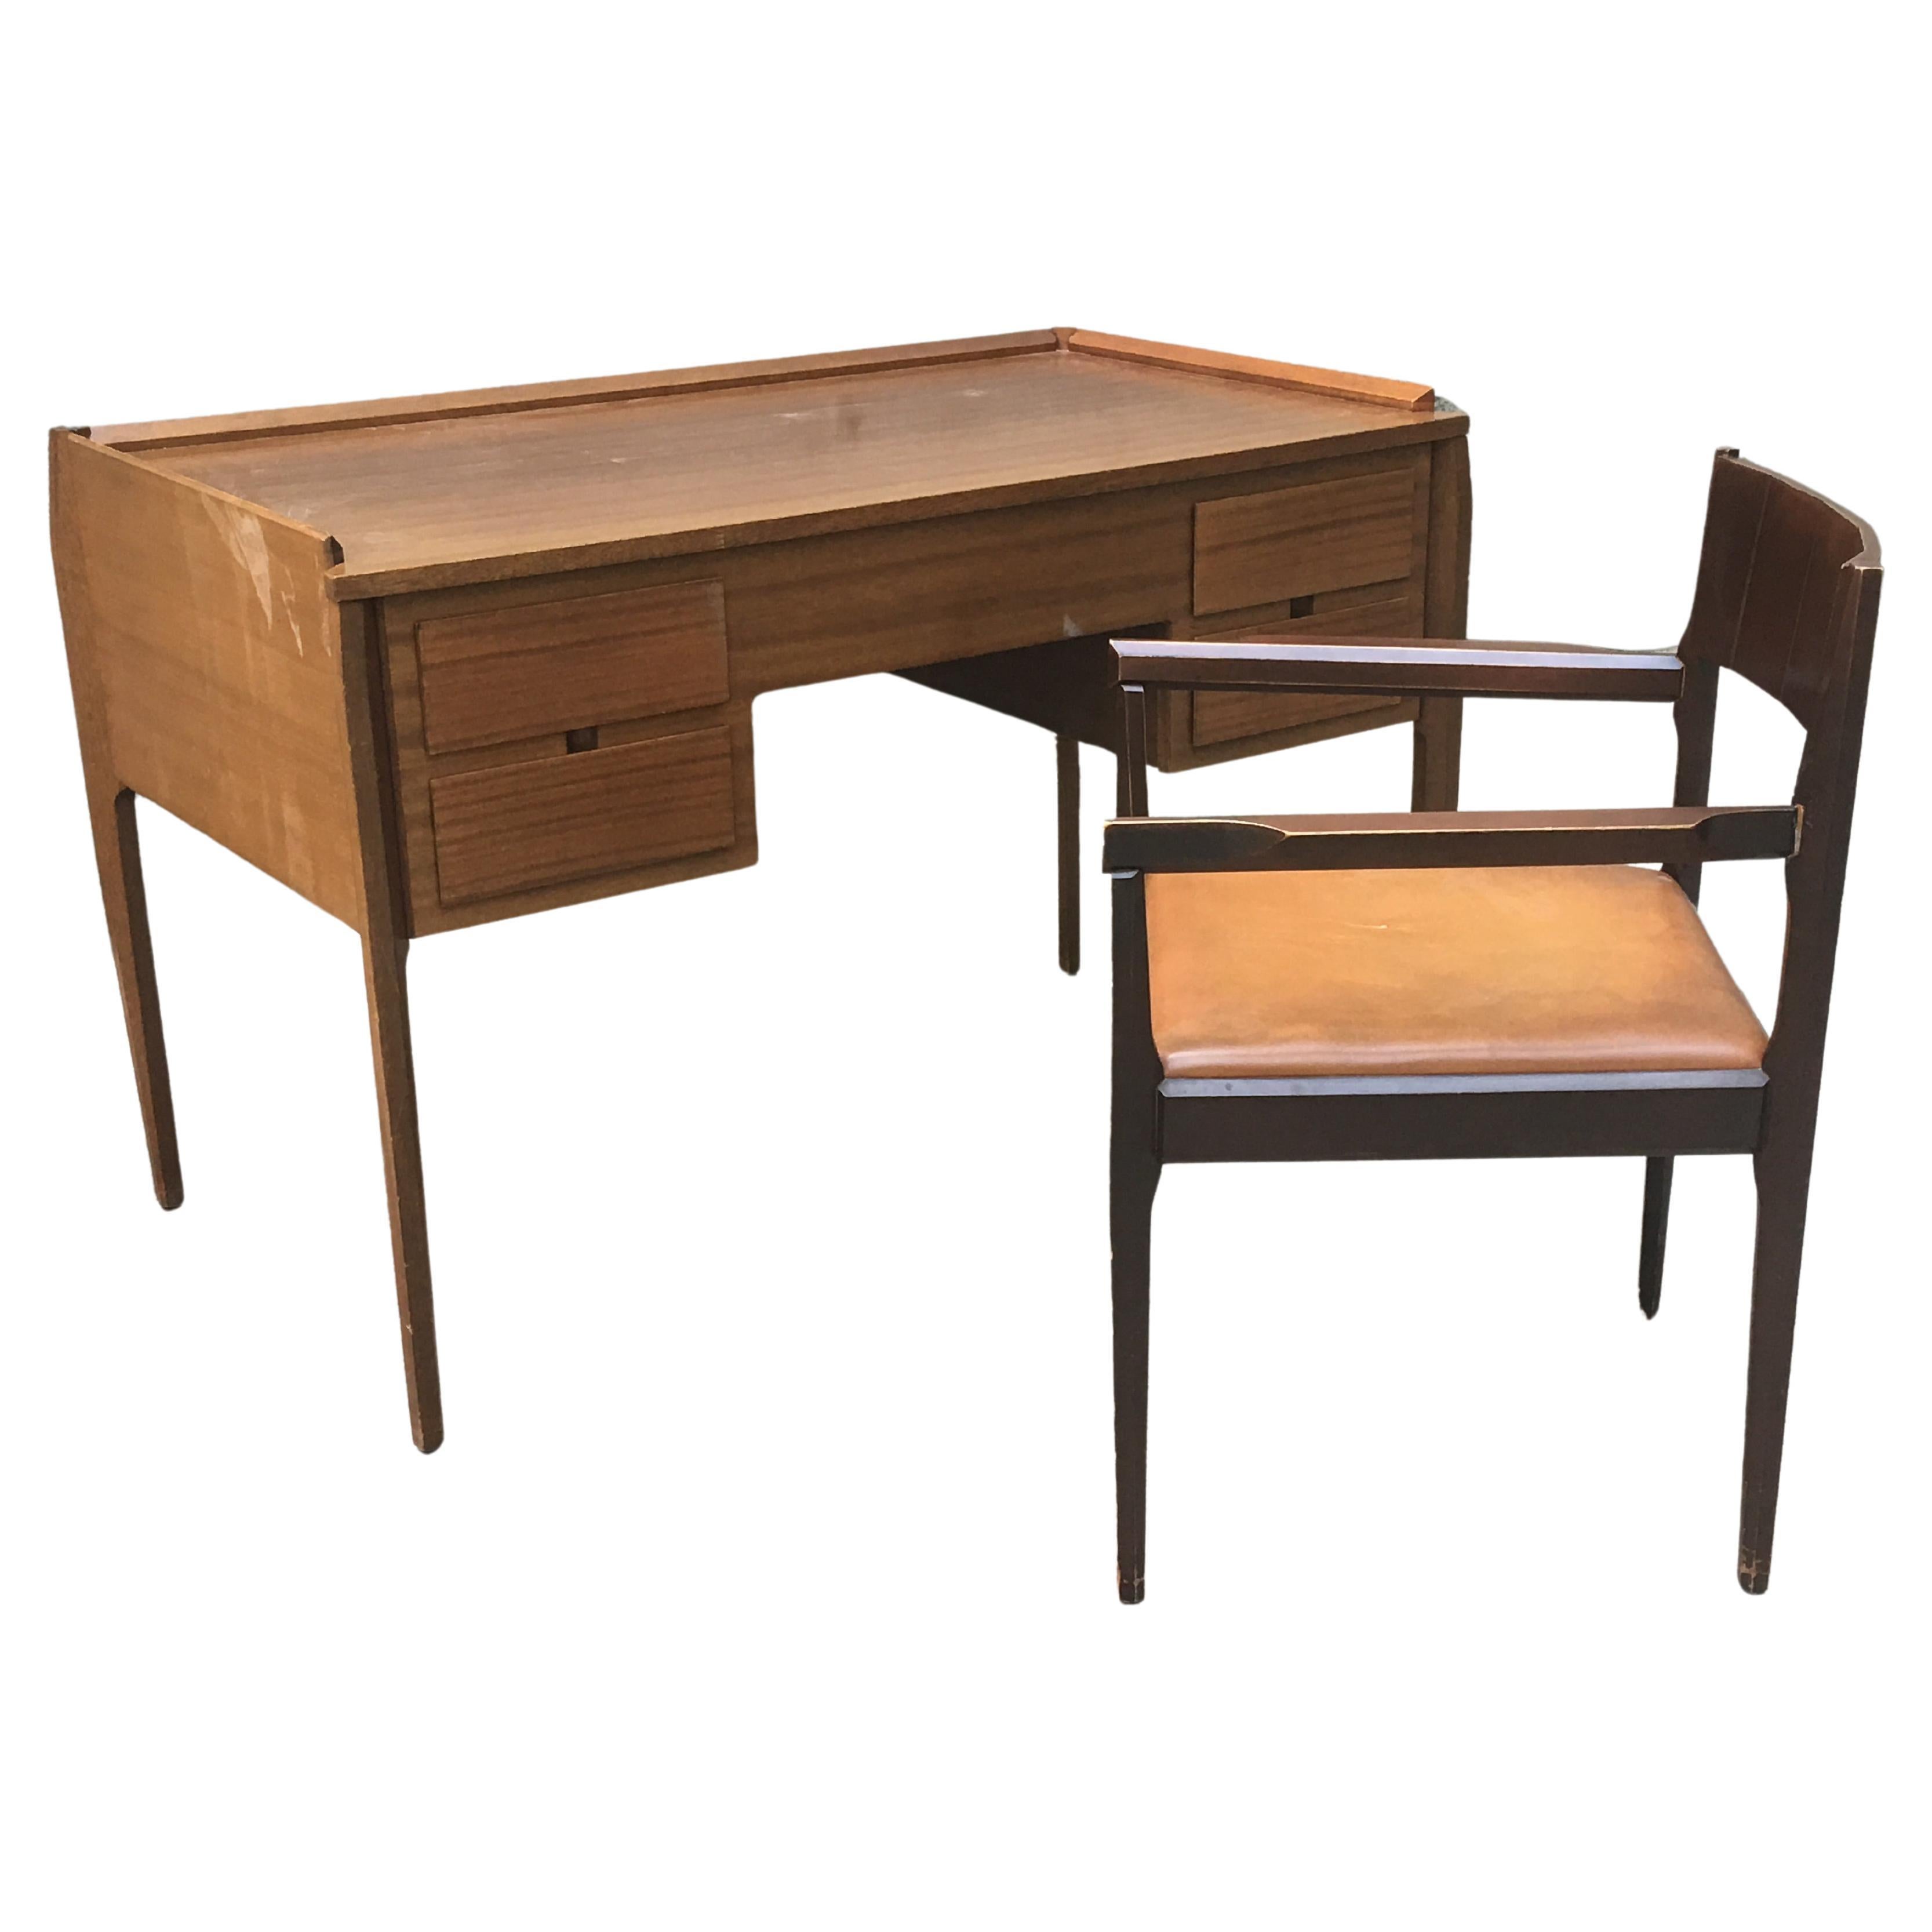 Small Italian Desk with Matching Chair - 60's - Vittorio Dassi -  Set of 2